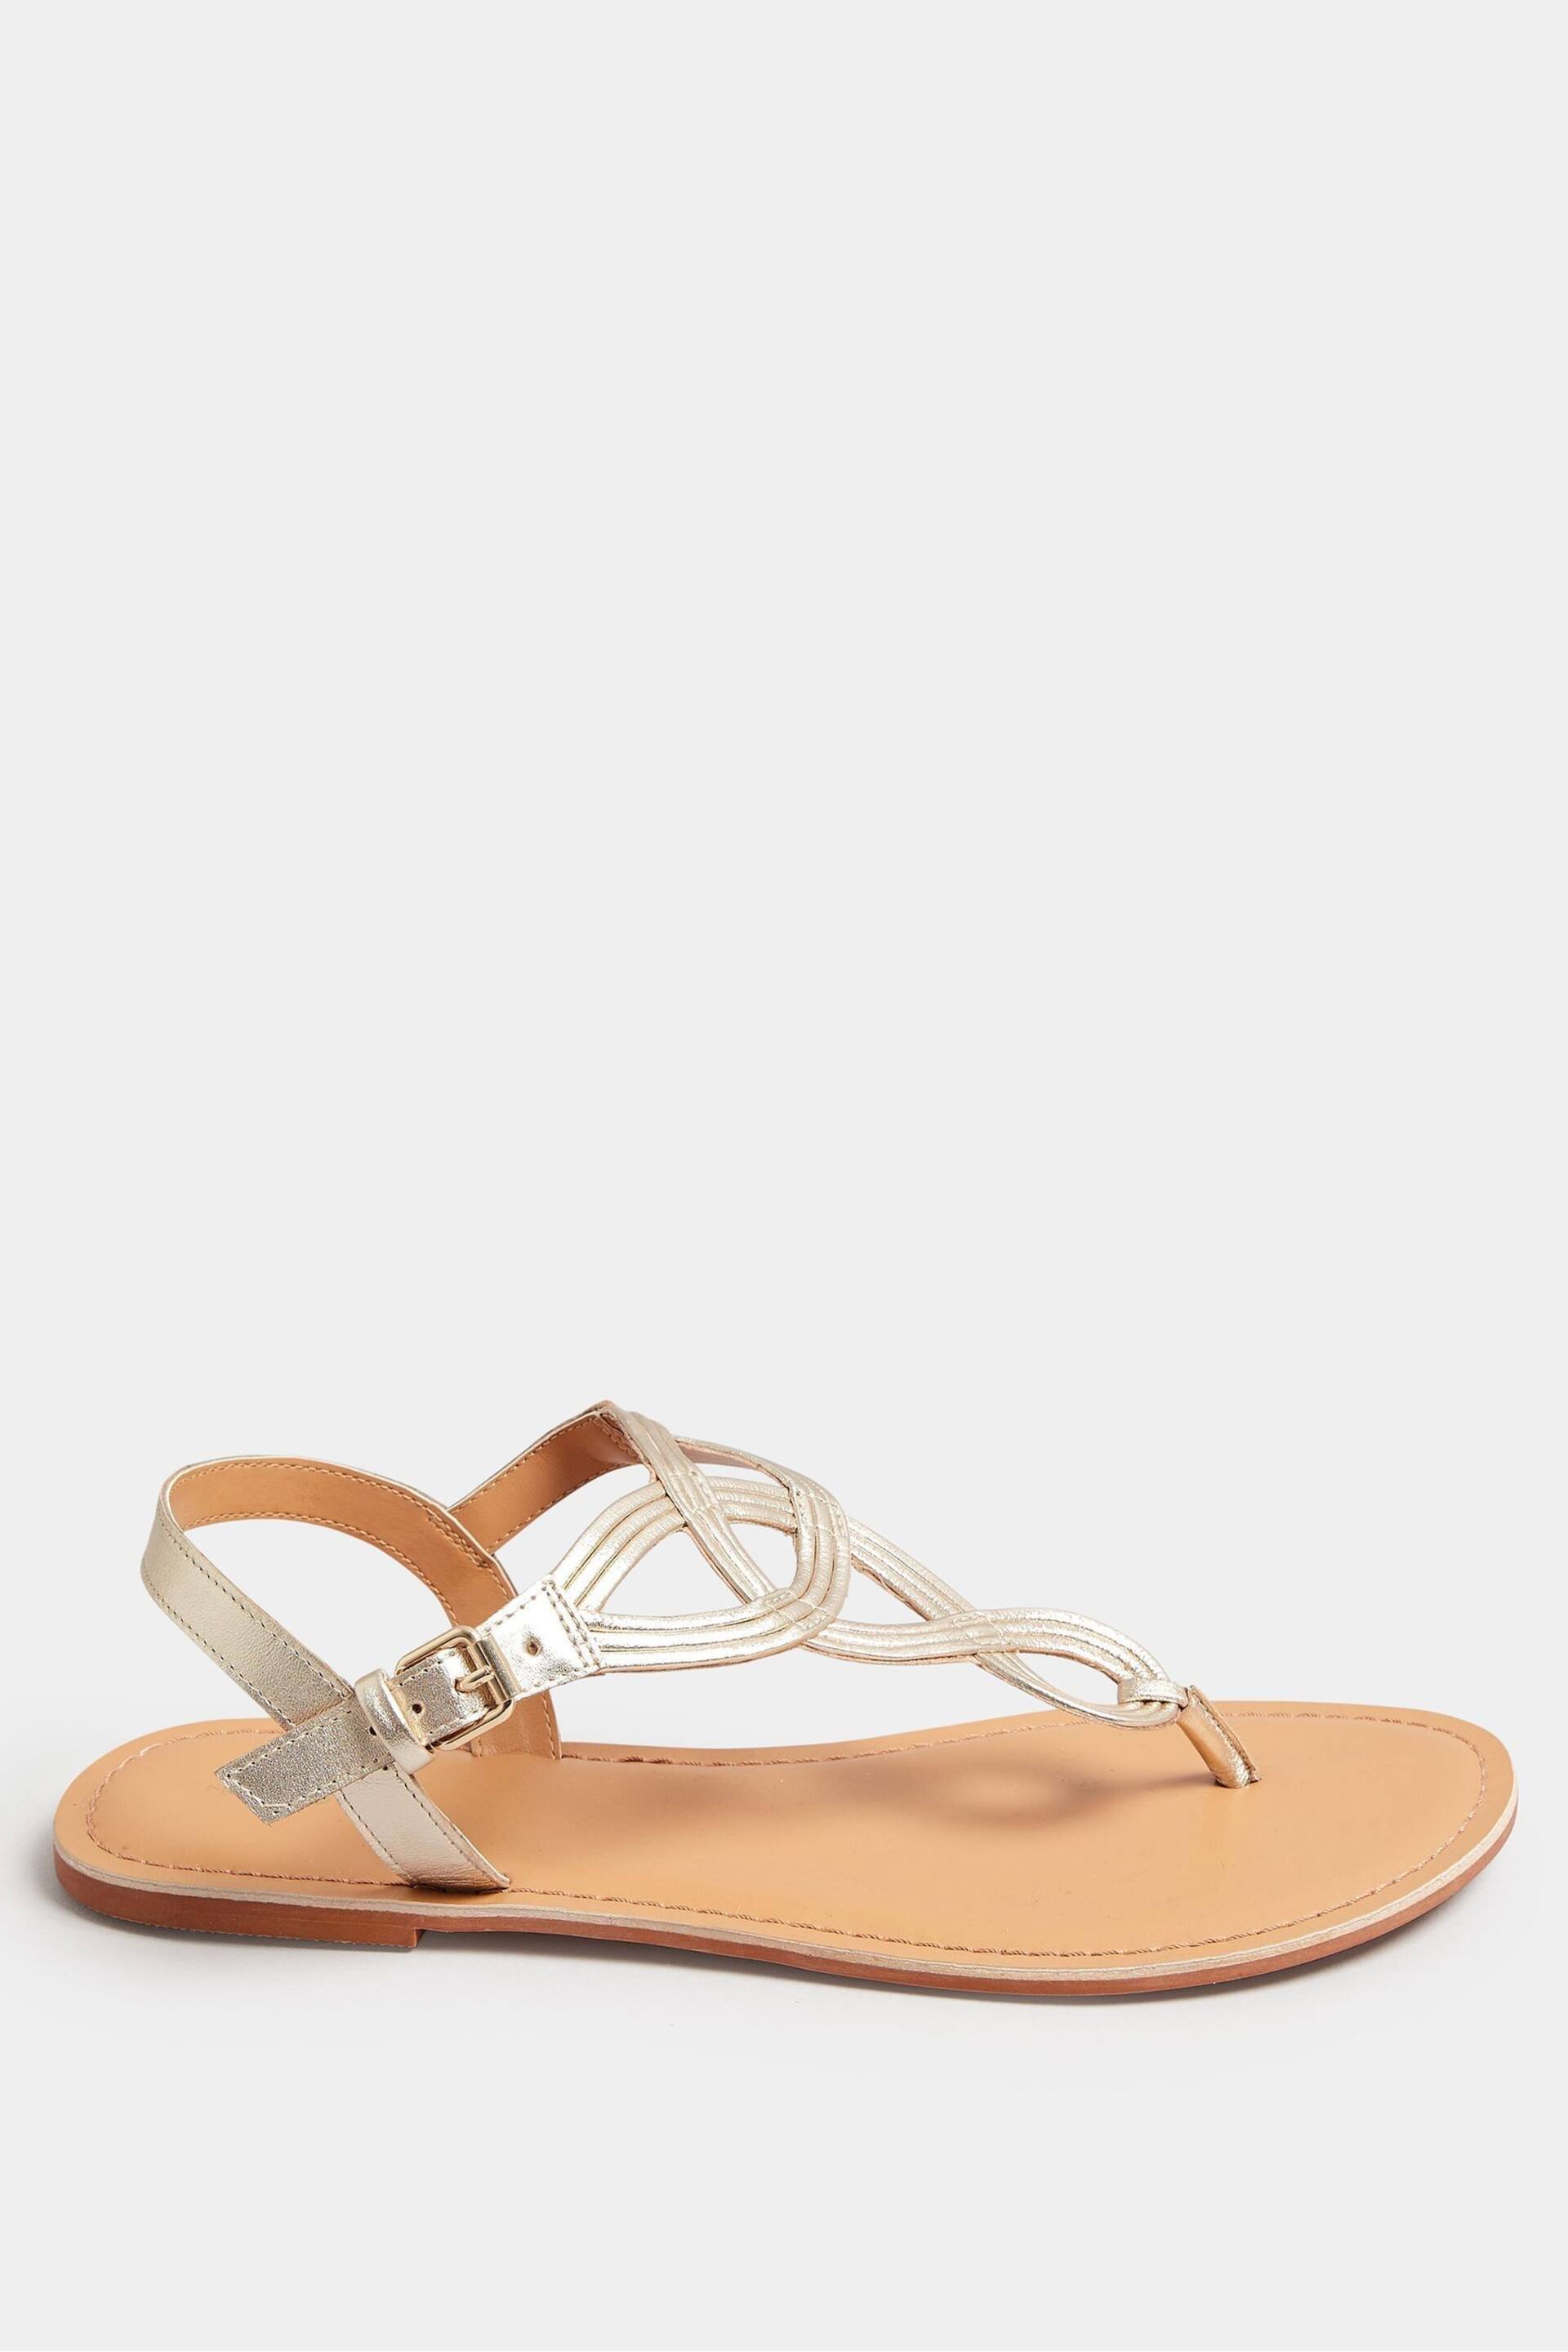 Long Tall Sally Gold LTS Gold Leather Swirl Toe Post Flat Sandals In Standard Fit - Image 2 of 3